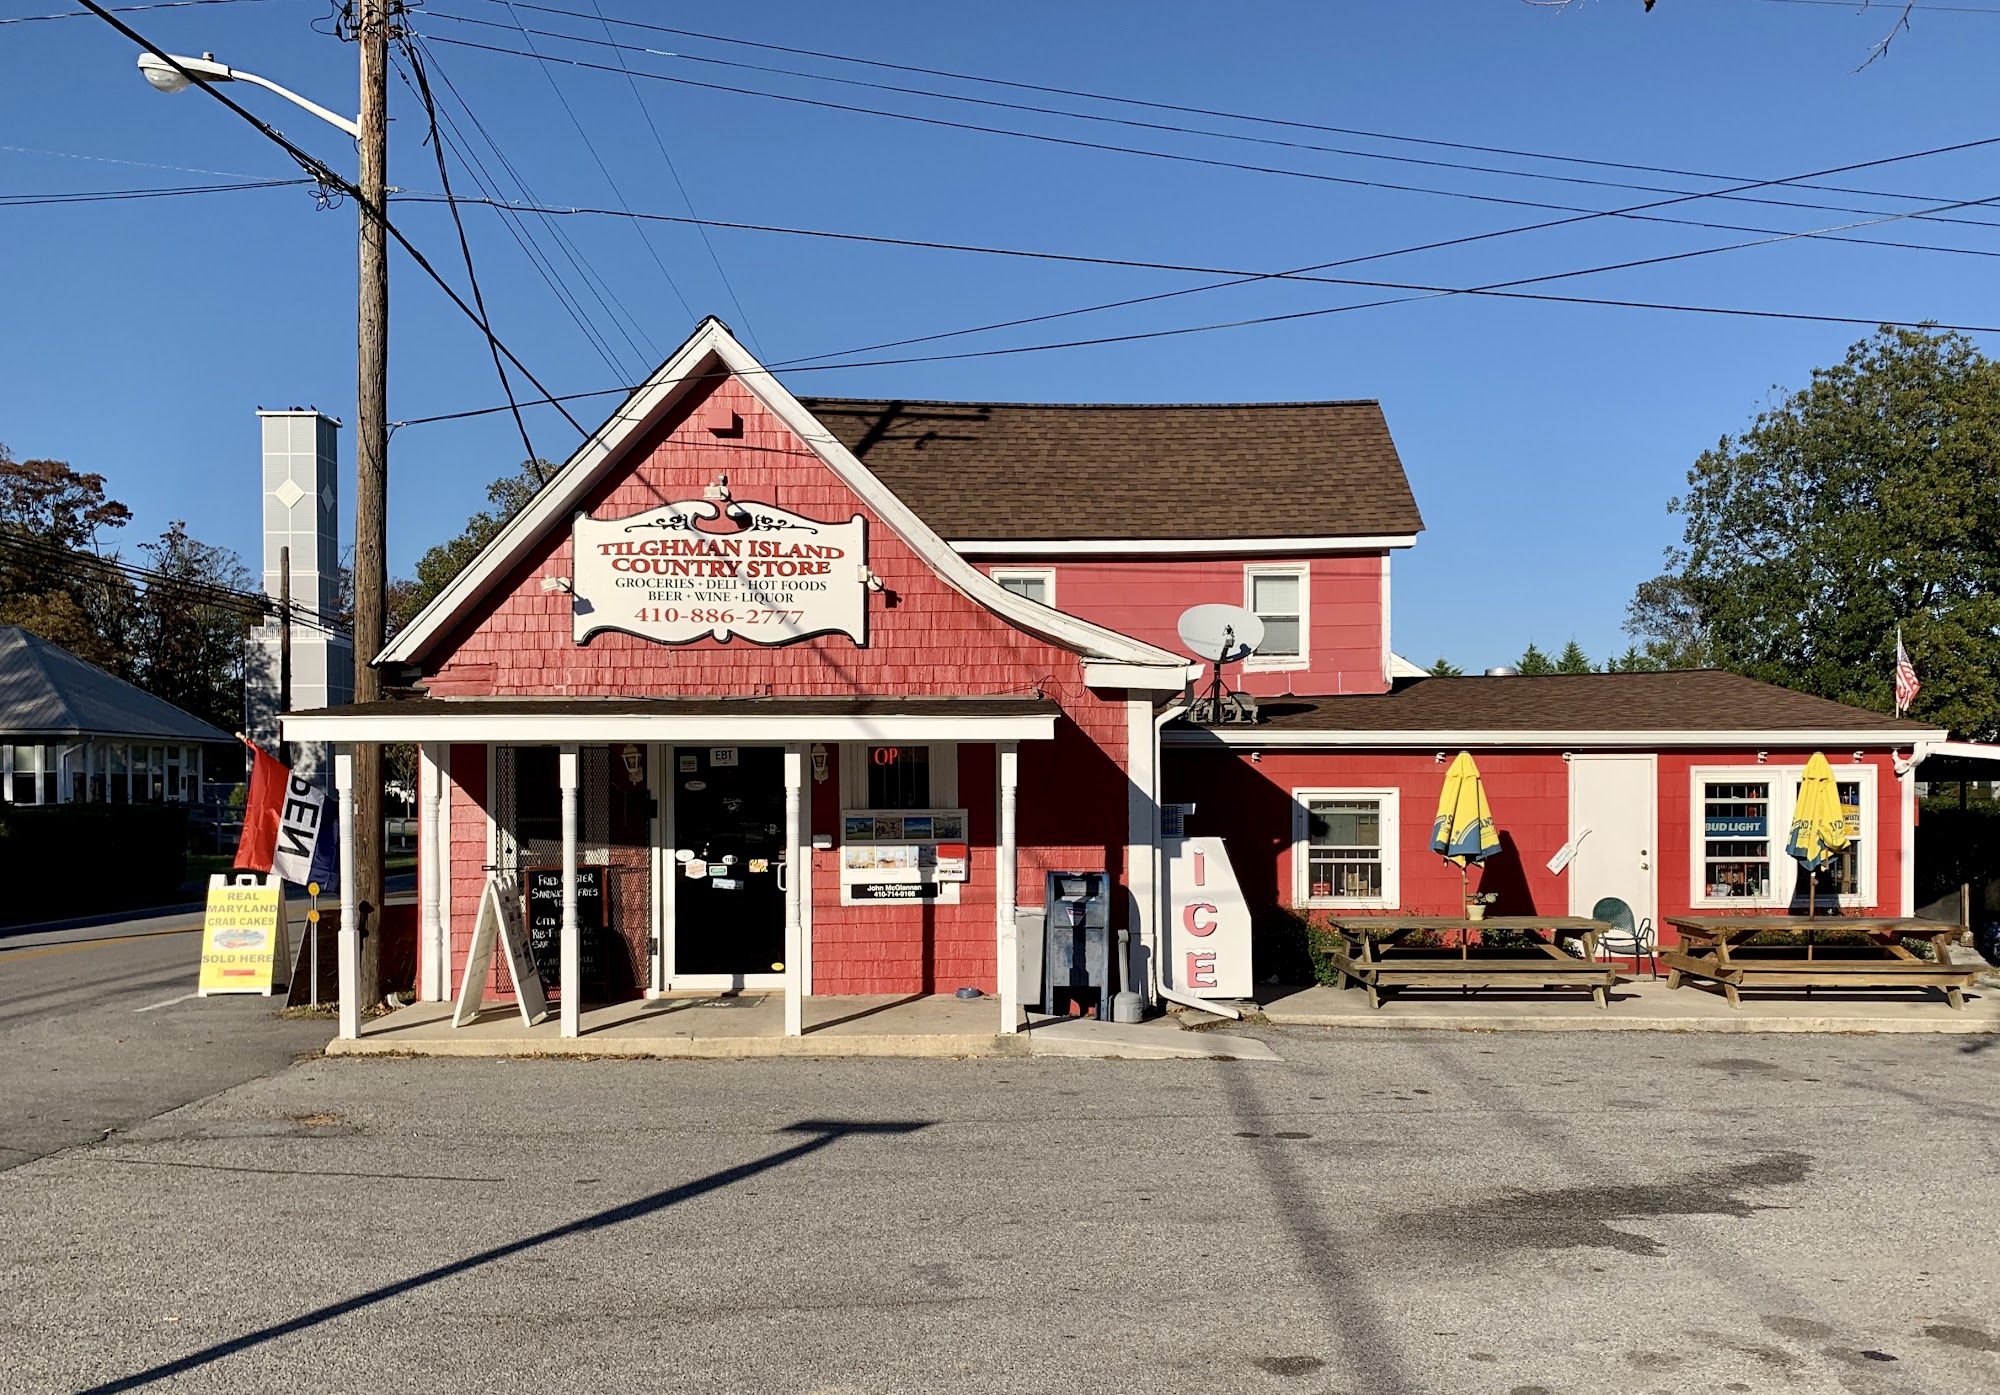 Tilghman Island Country Store